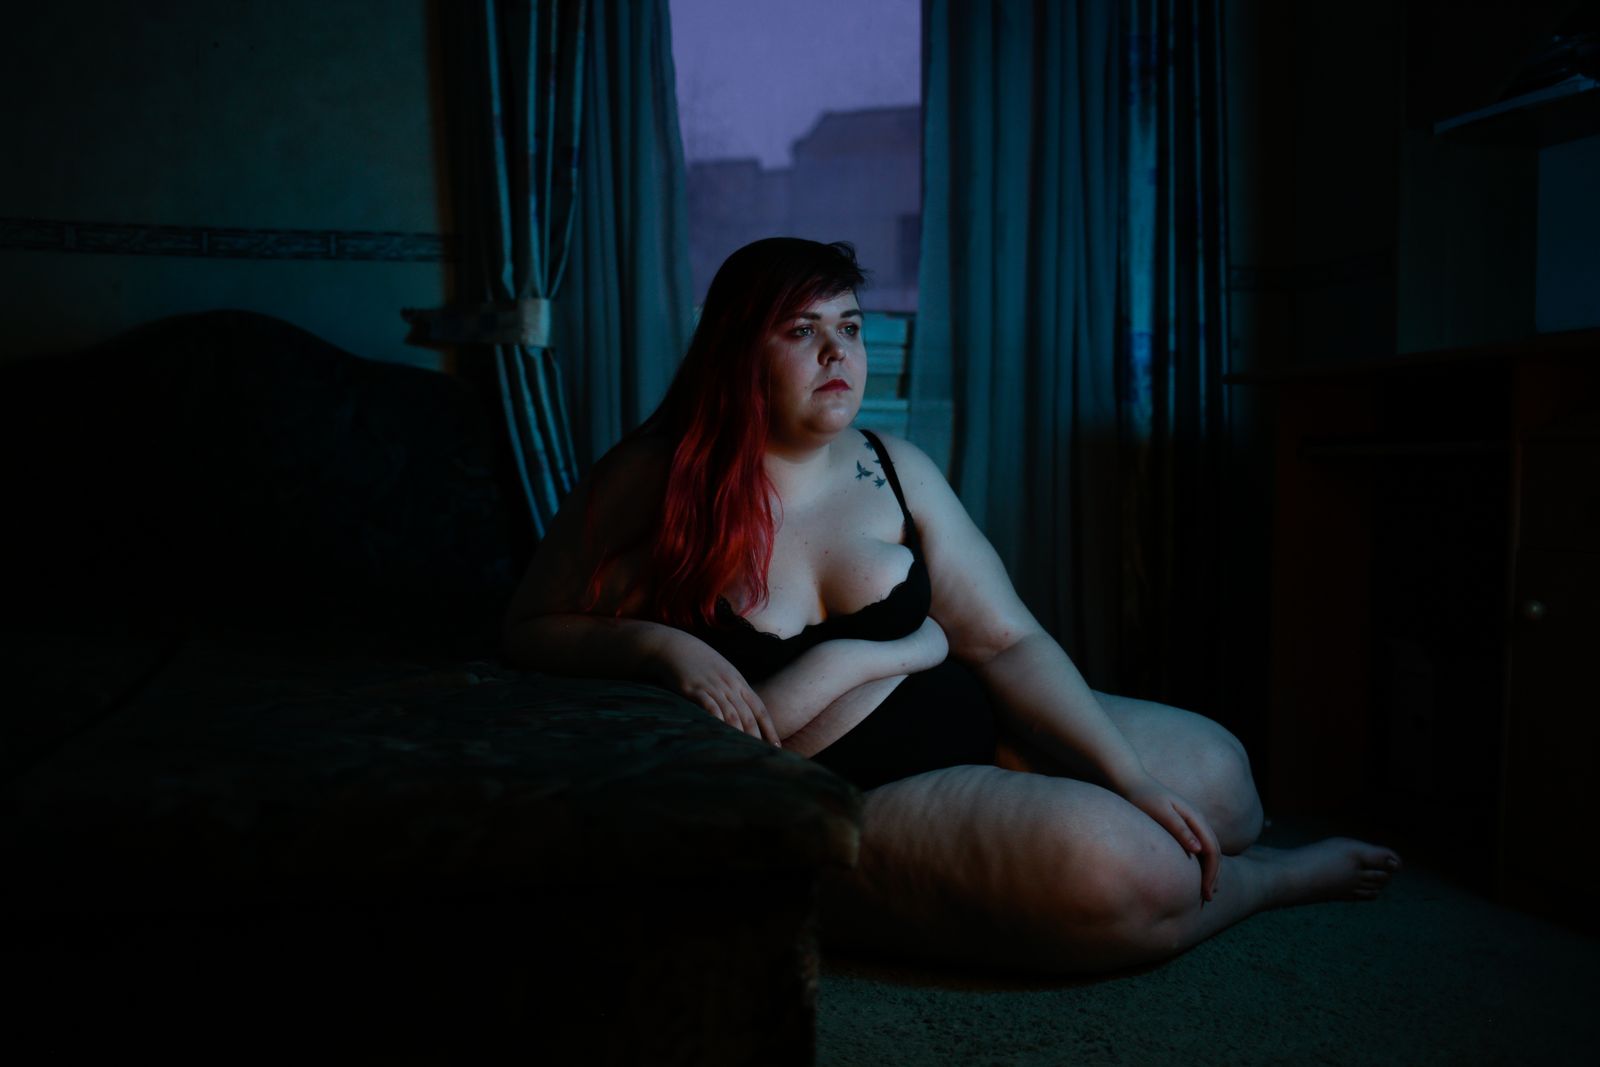 © Mary  Gelman - Image from the No shame photography project